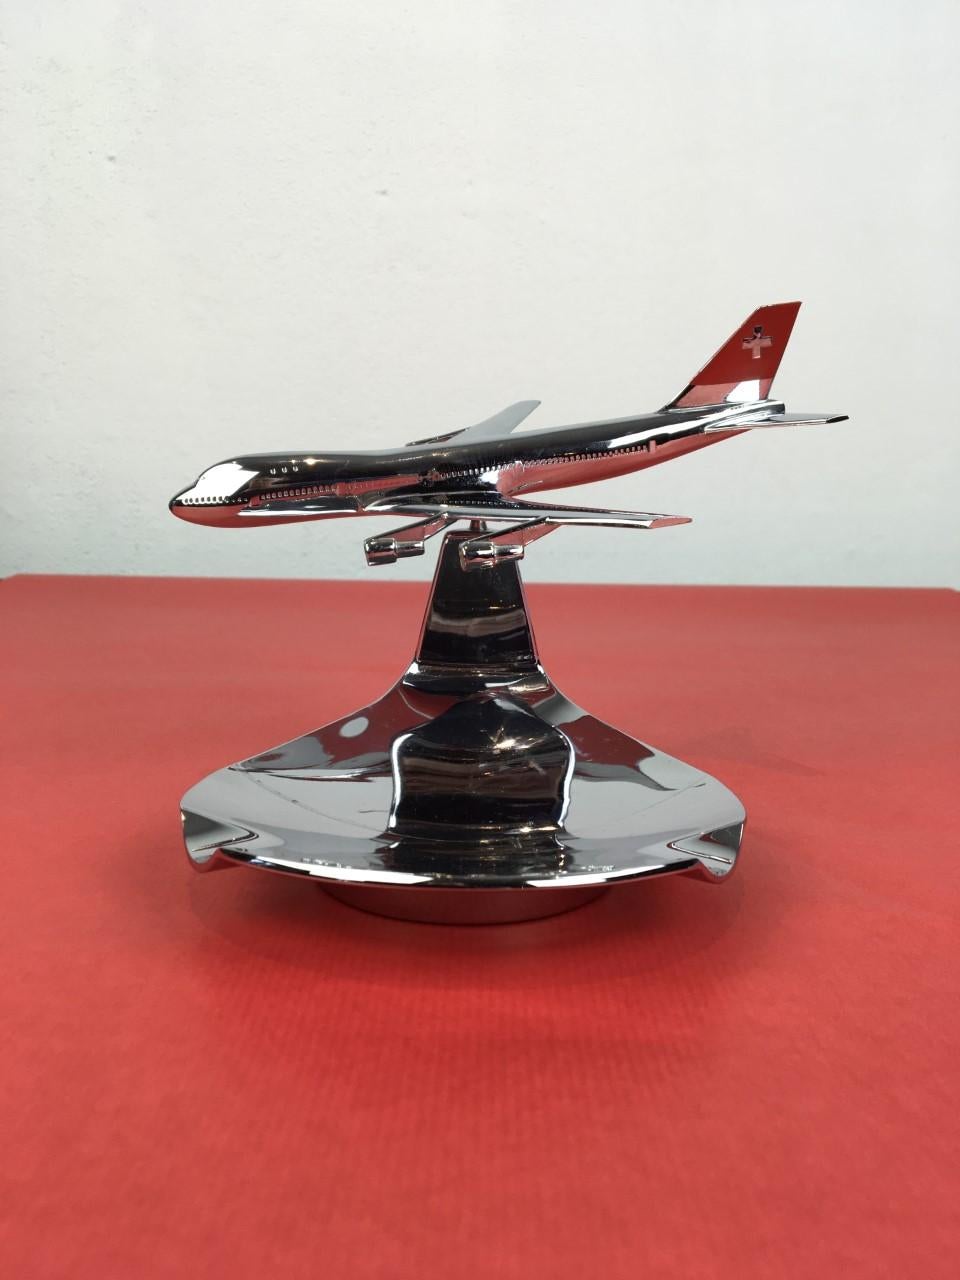 1960s chrome ashtray for Swissair. 
This ashtray has an airplane on top which can be turned in a position of choice by the ball joint. 
It's a Swissair DC8 aeroplane. 
This vintage chrome ashtray is marked under: Made in Switserland - Buhler